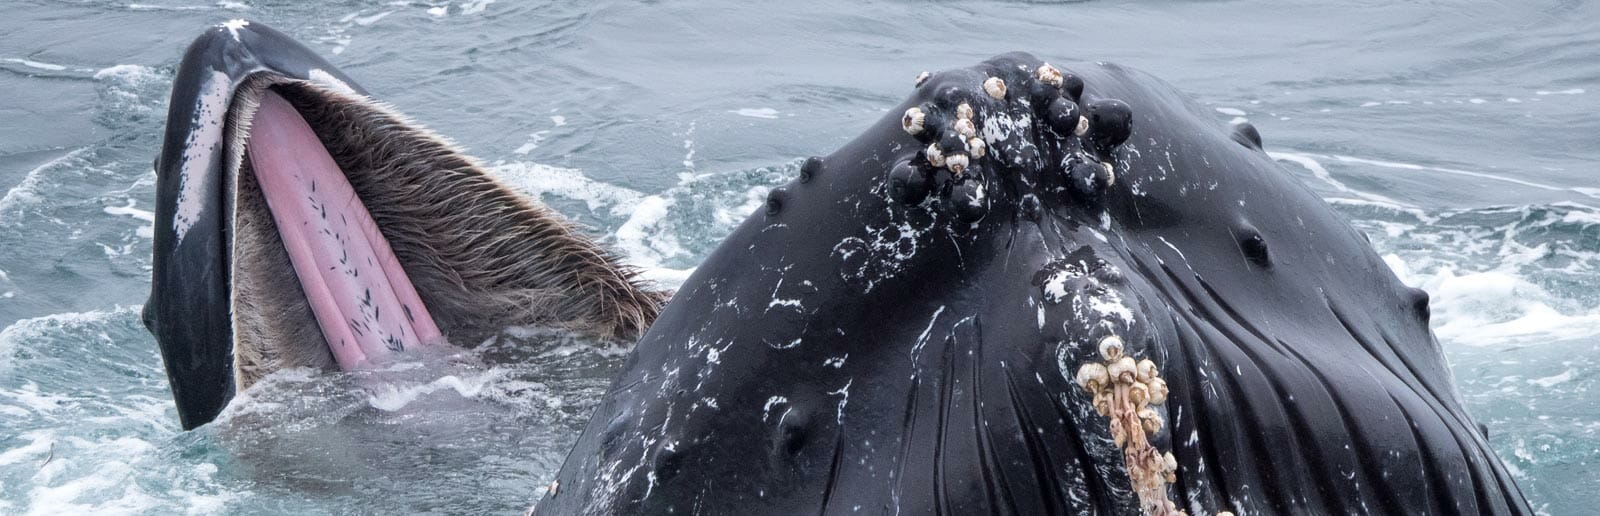 Huge Gaping Maw and Tongue of Gray Whale With Barnacles